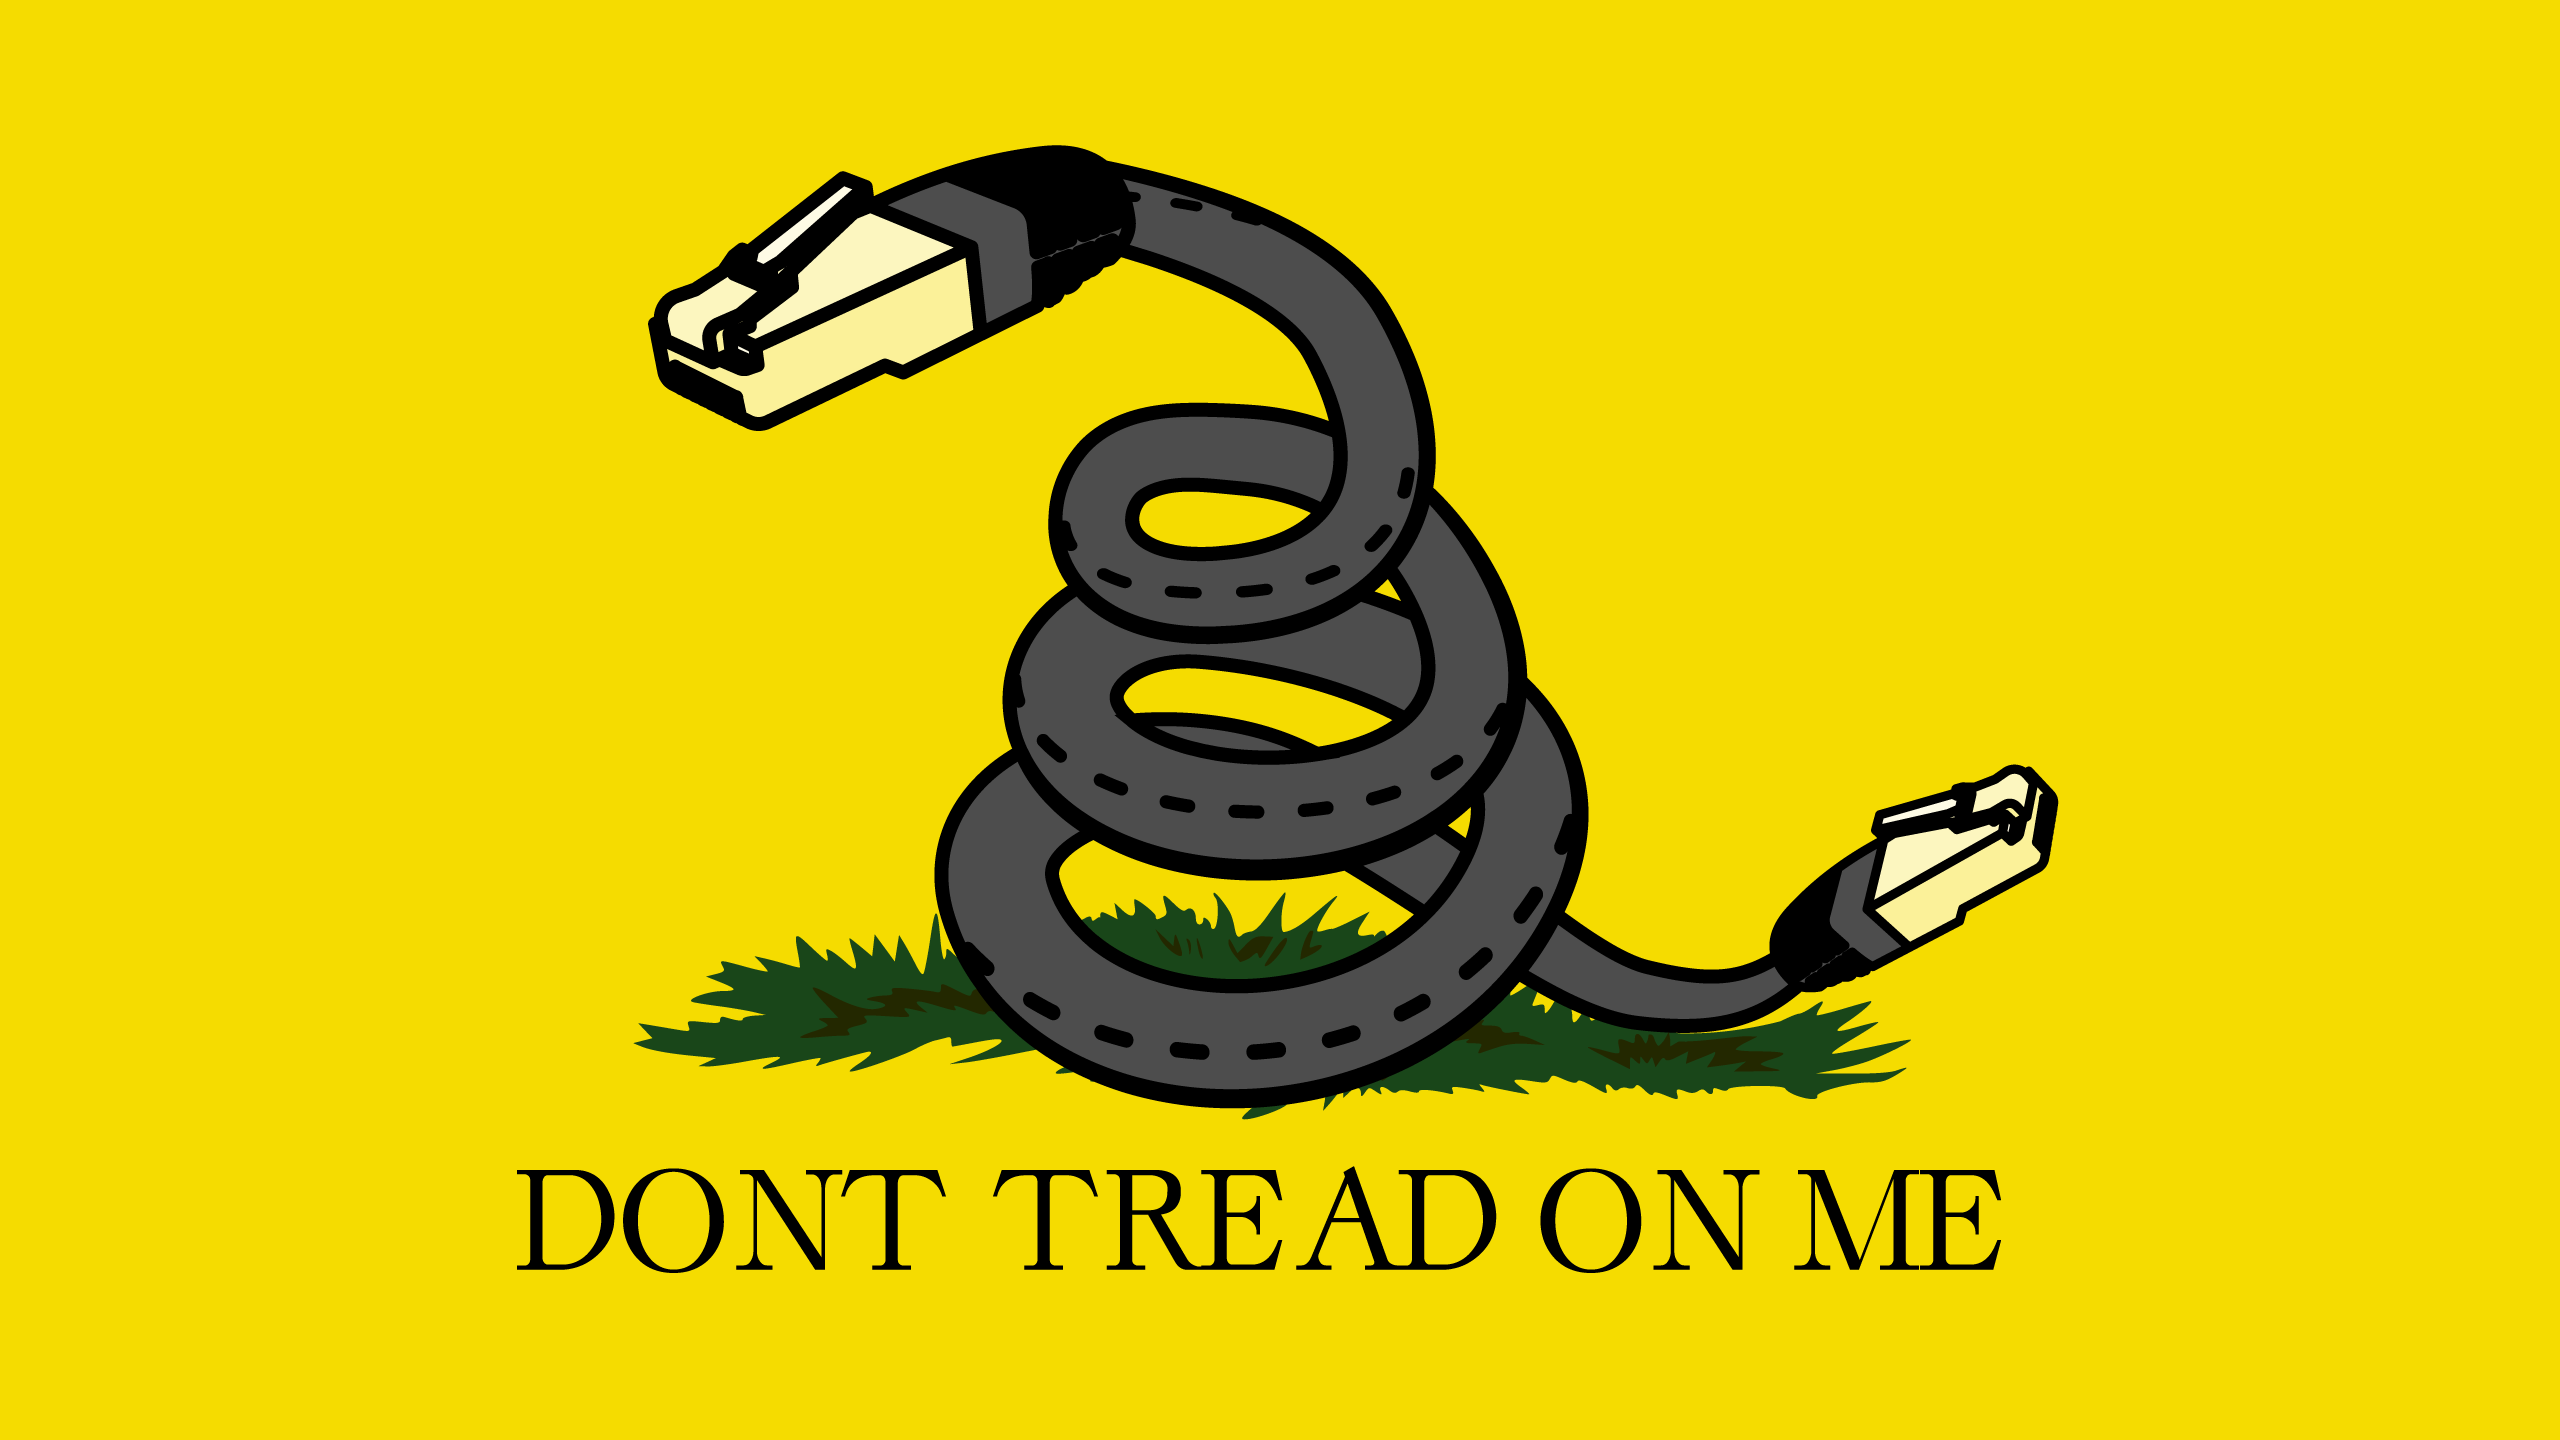 Why You Should Care About Net Neutrality